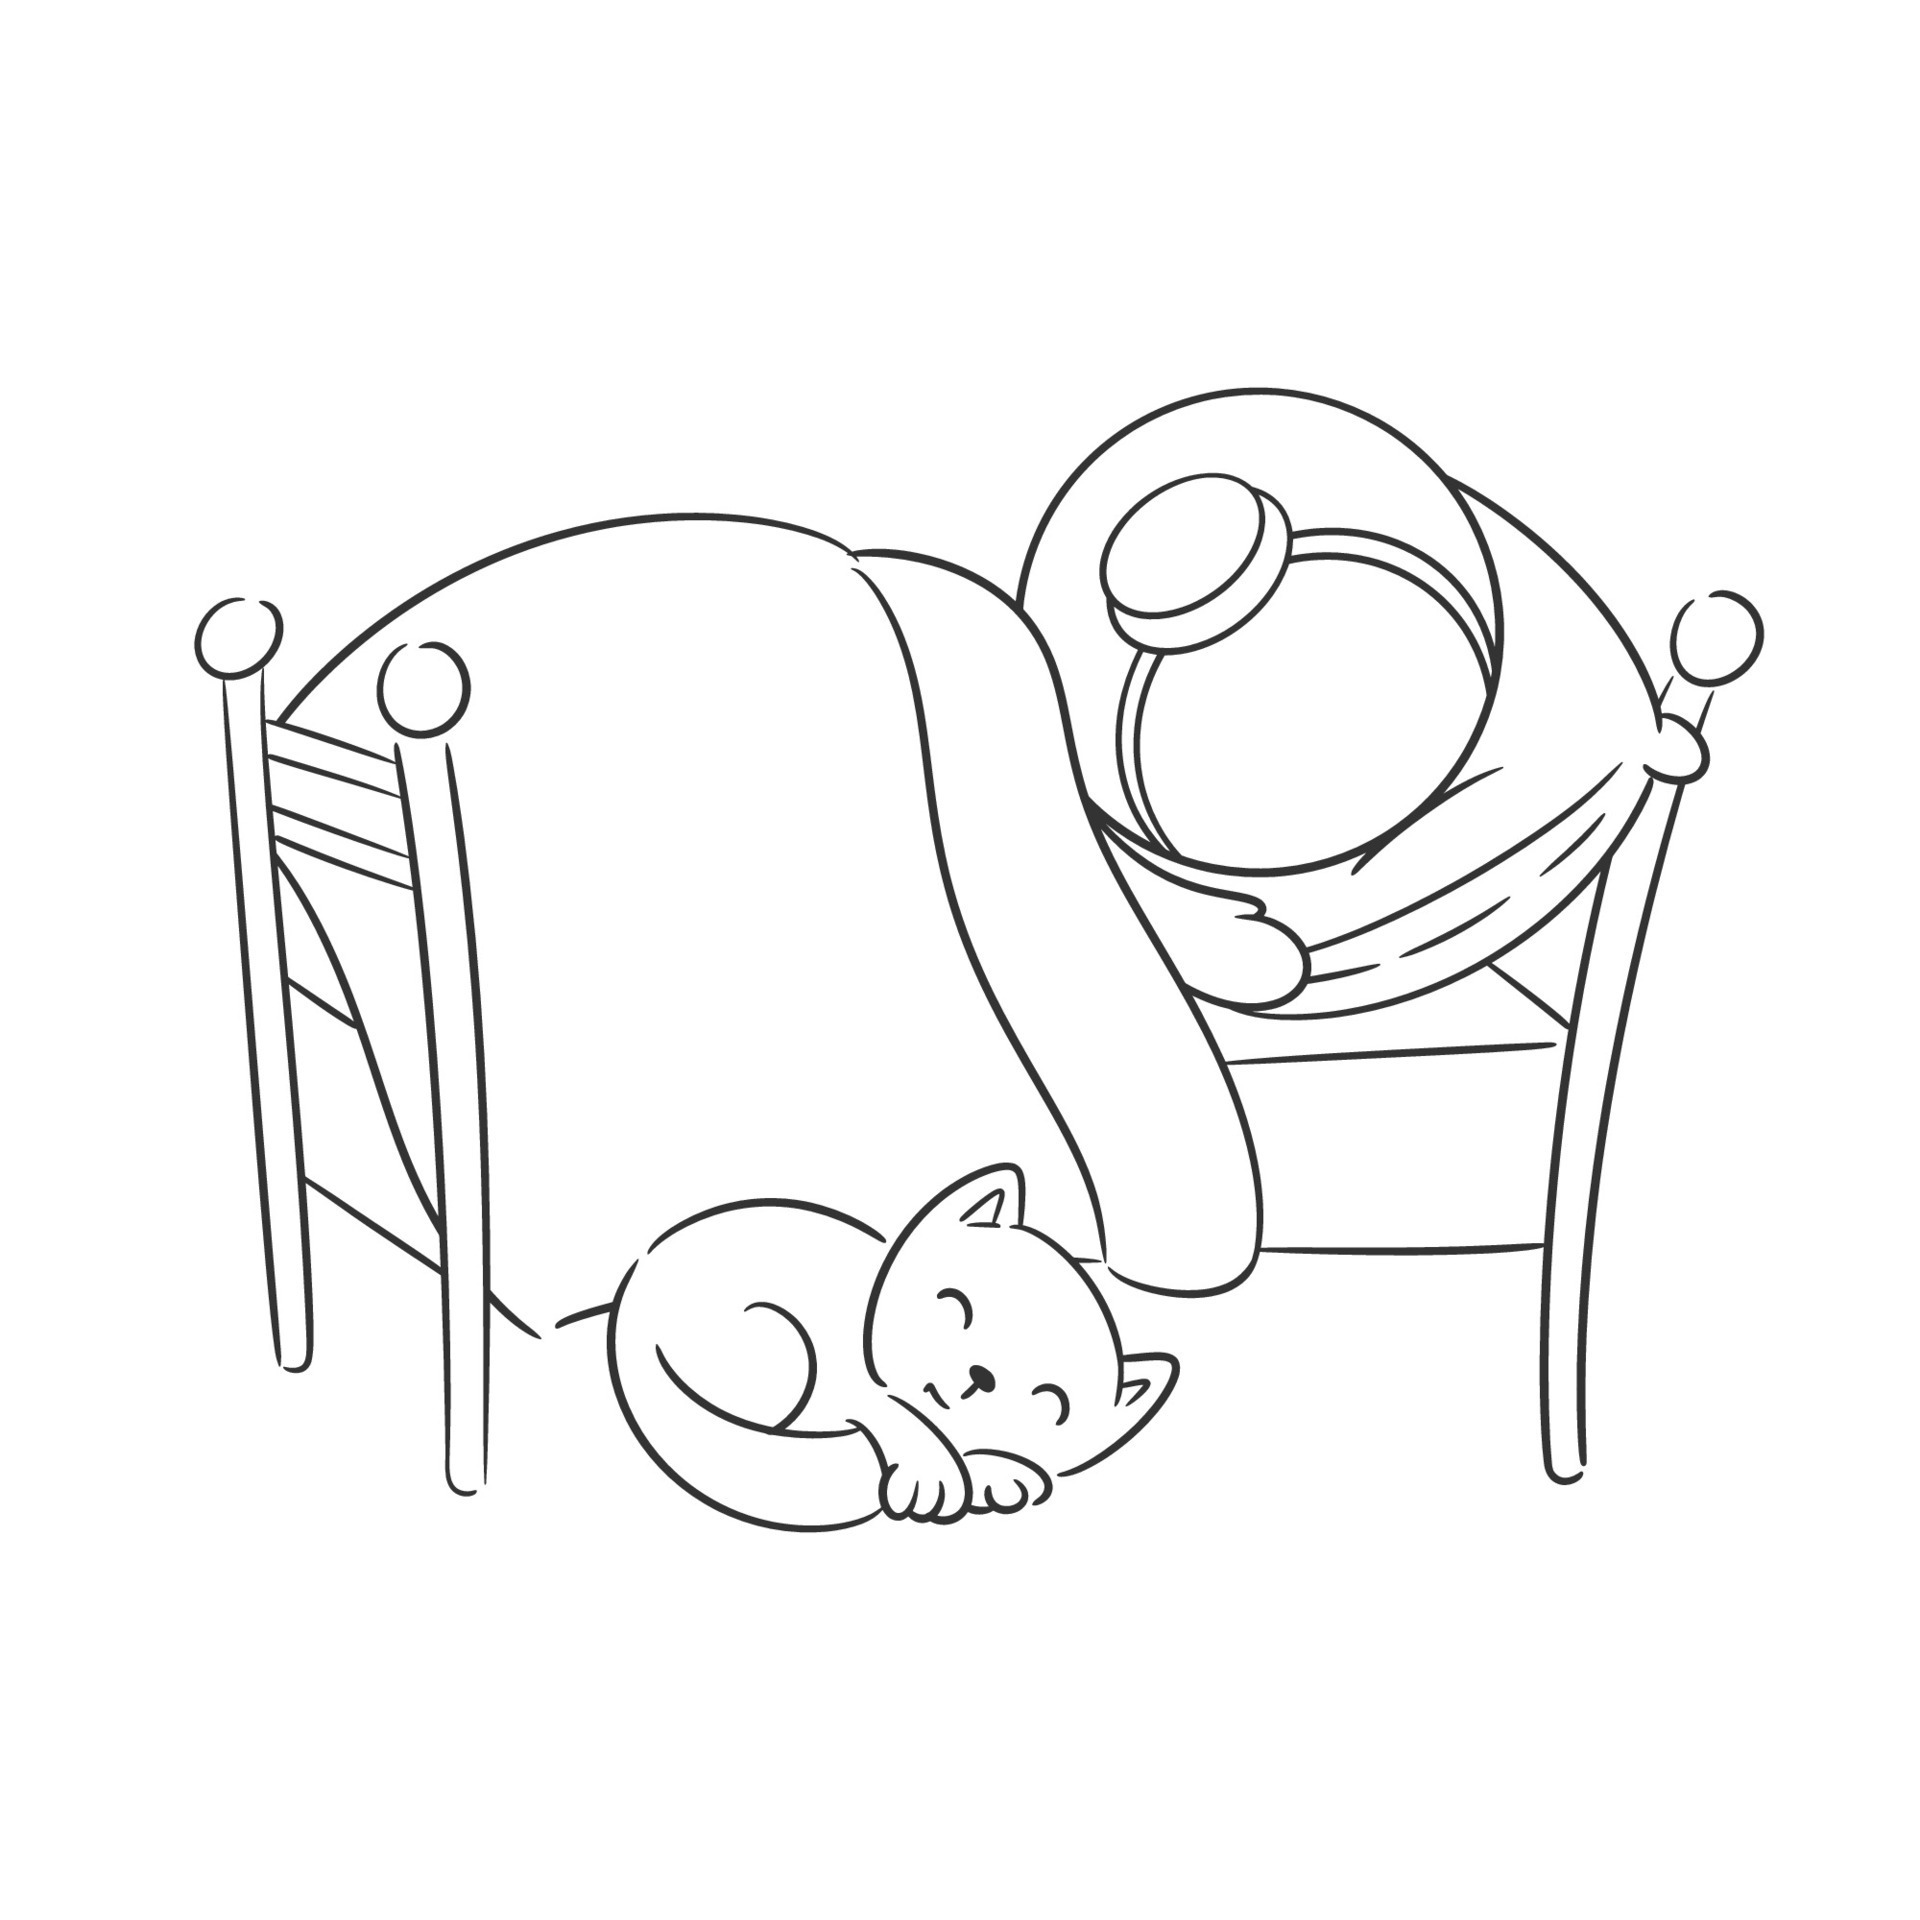 Astronaut is sleeping in bed with cat for coloring 27431996 Vector Art ...